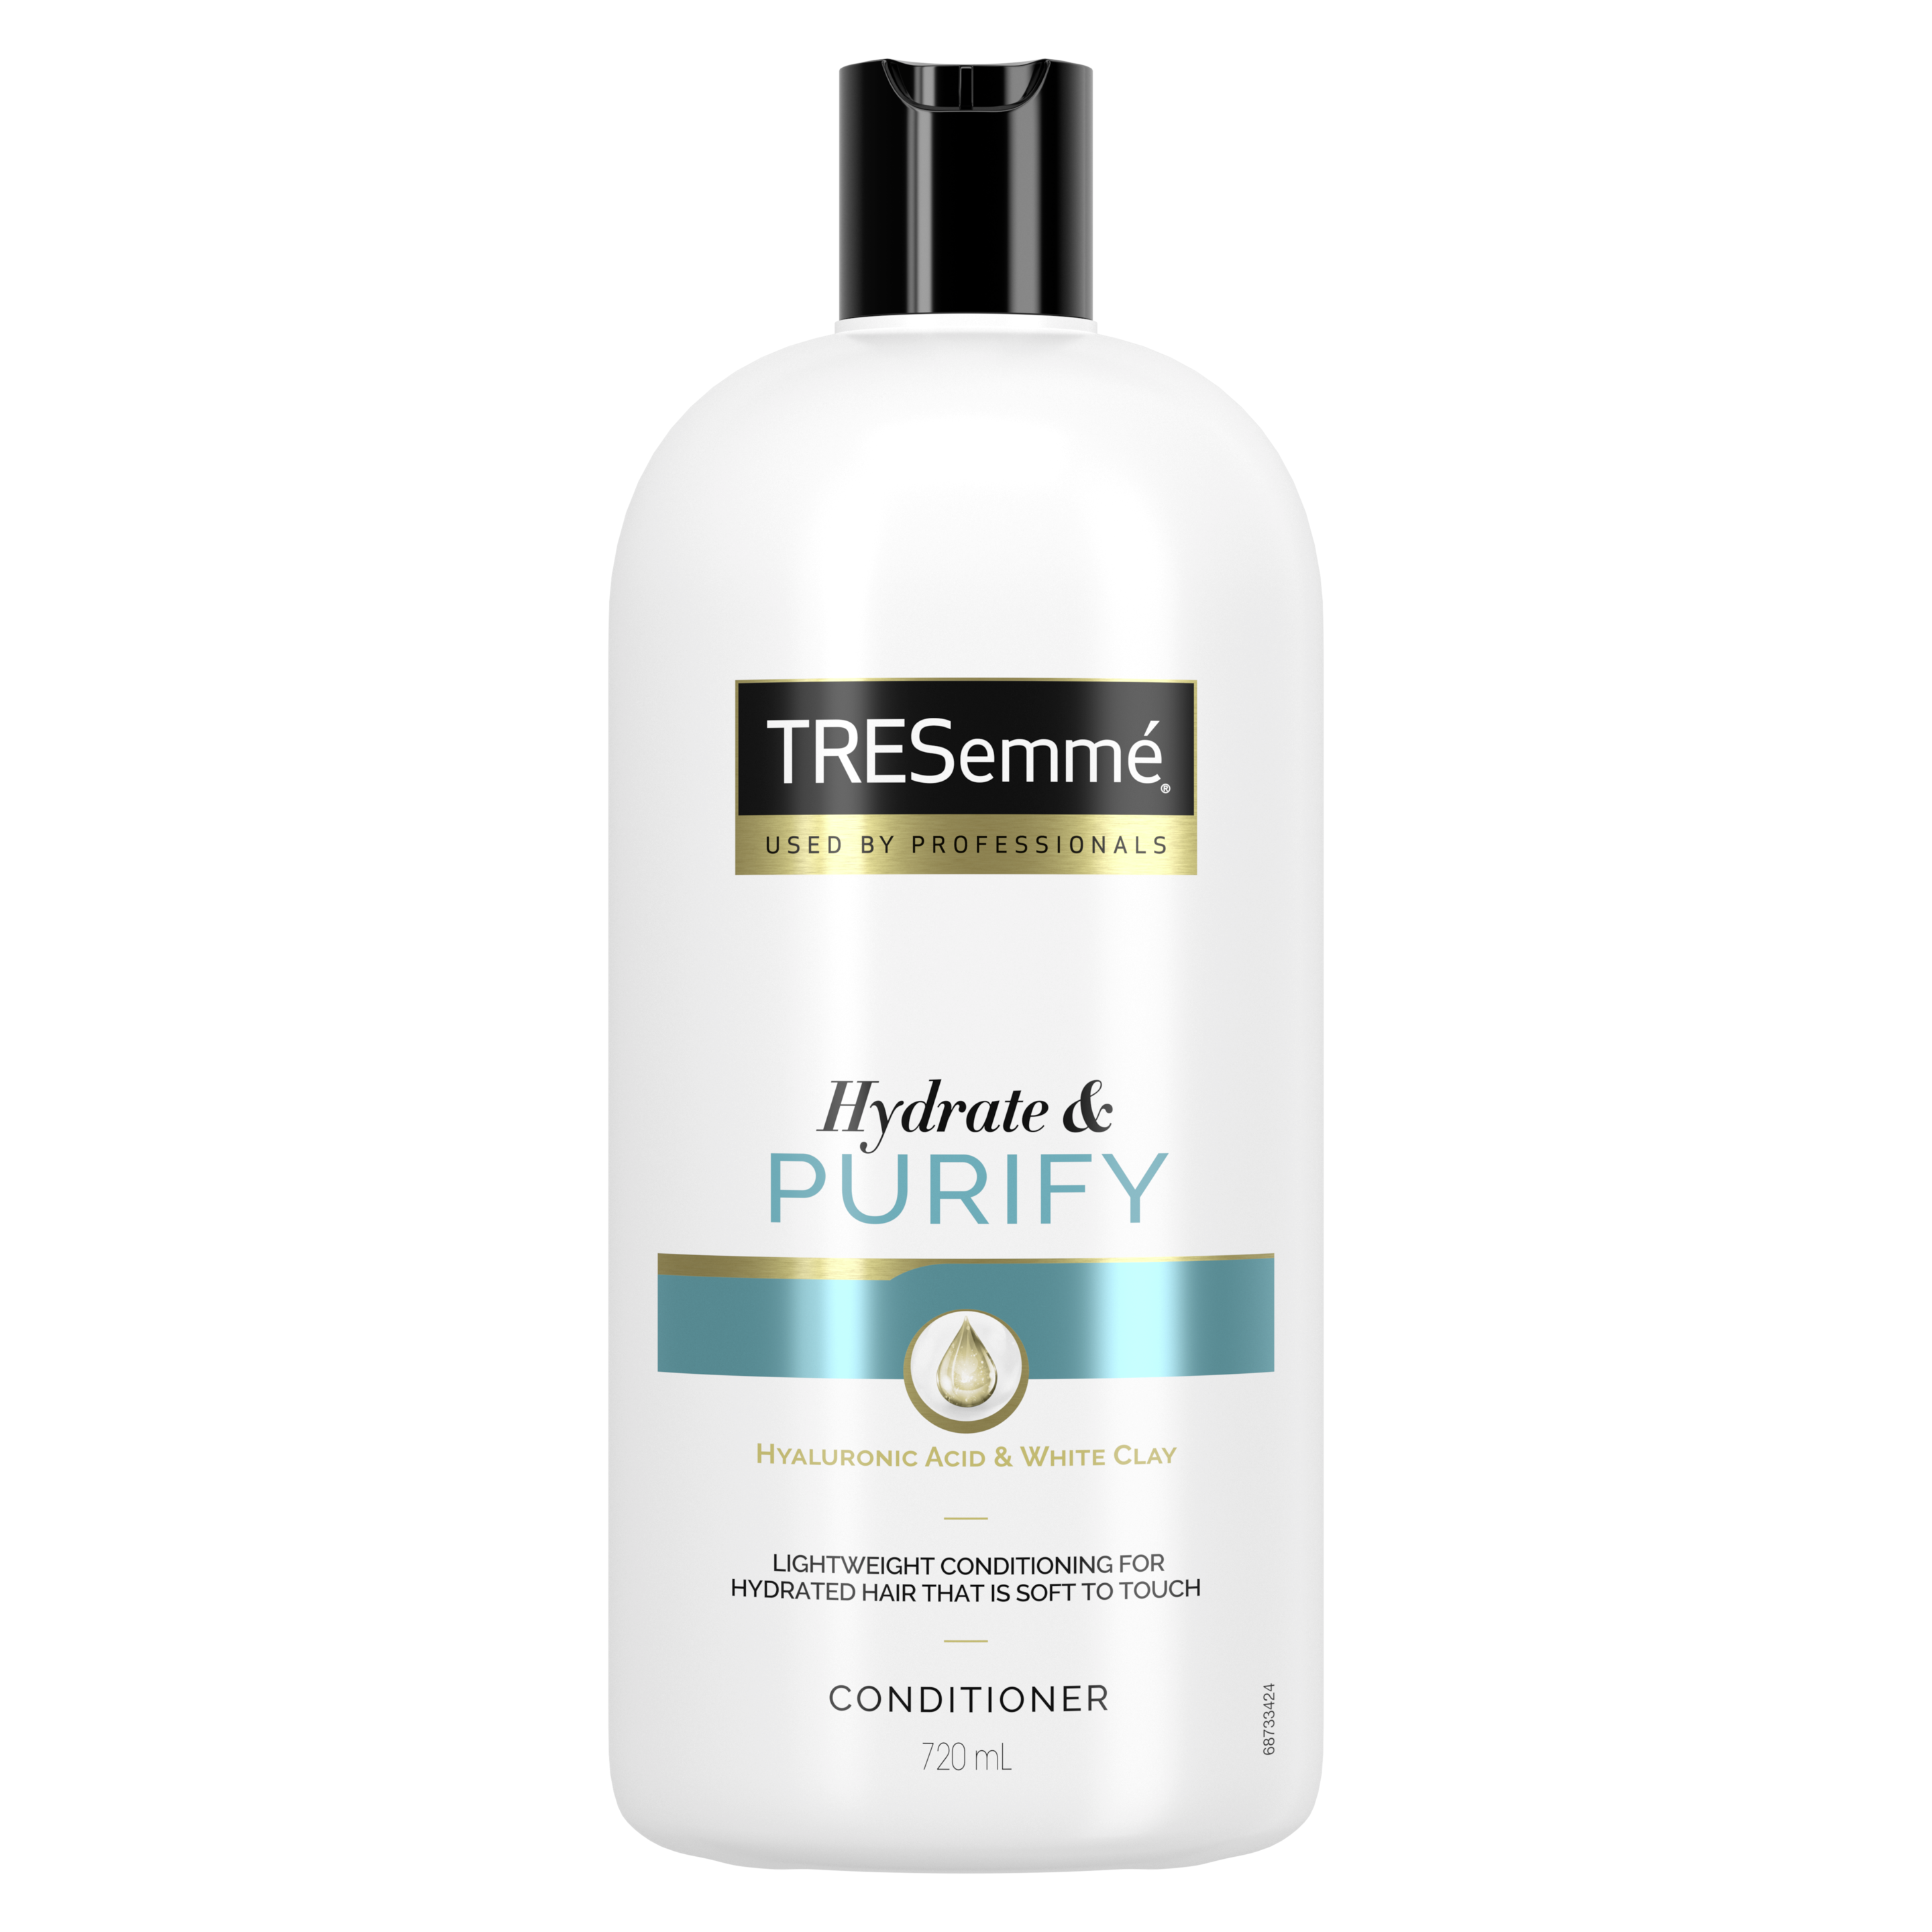 Hydrate & Purify Conditioner